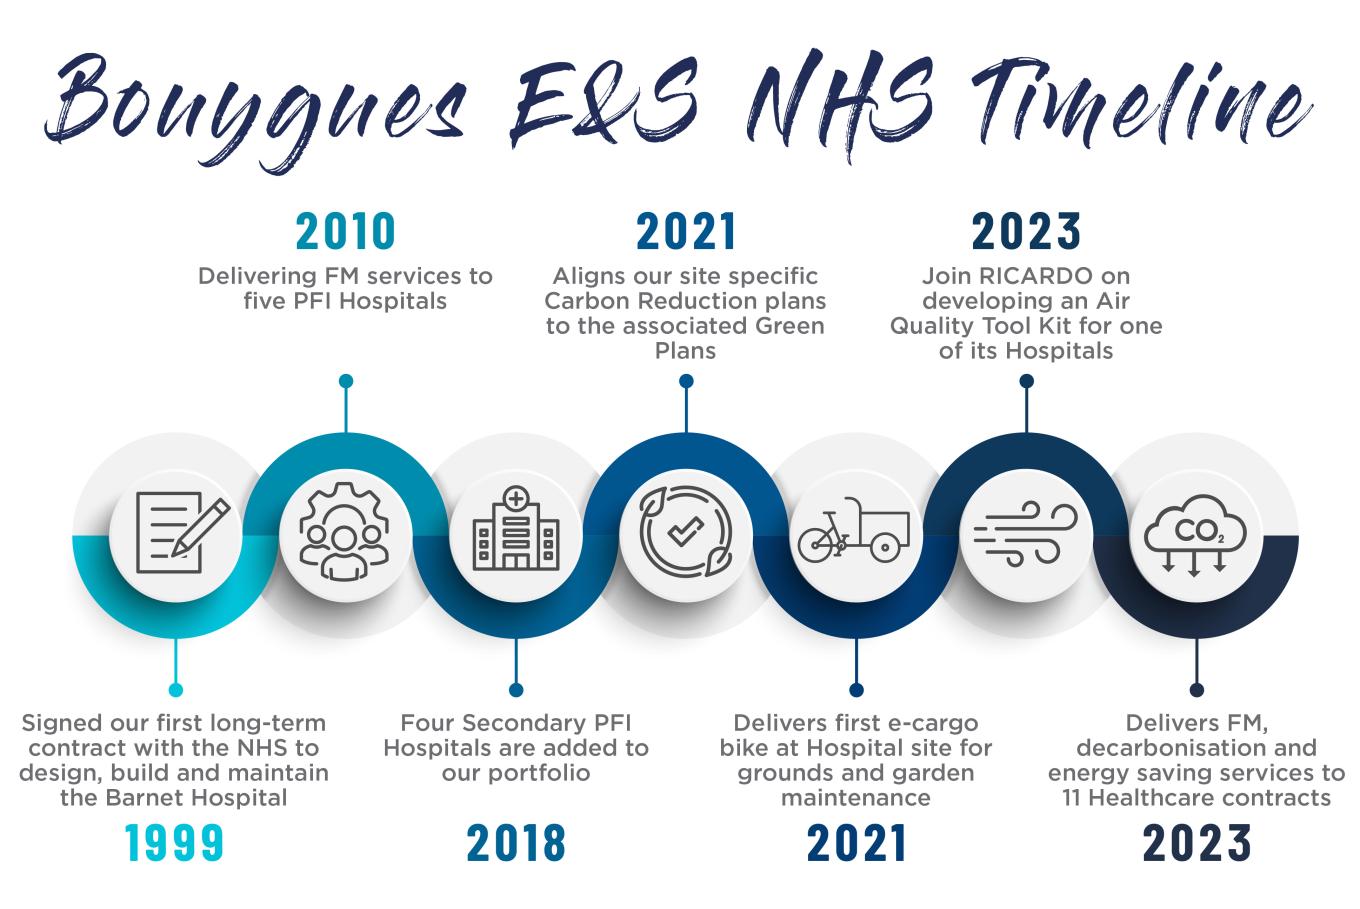 Bouygues-E&S-NHS-Timeline